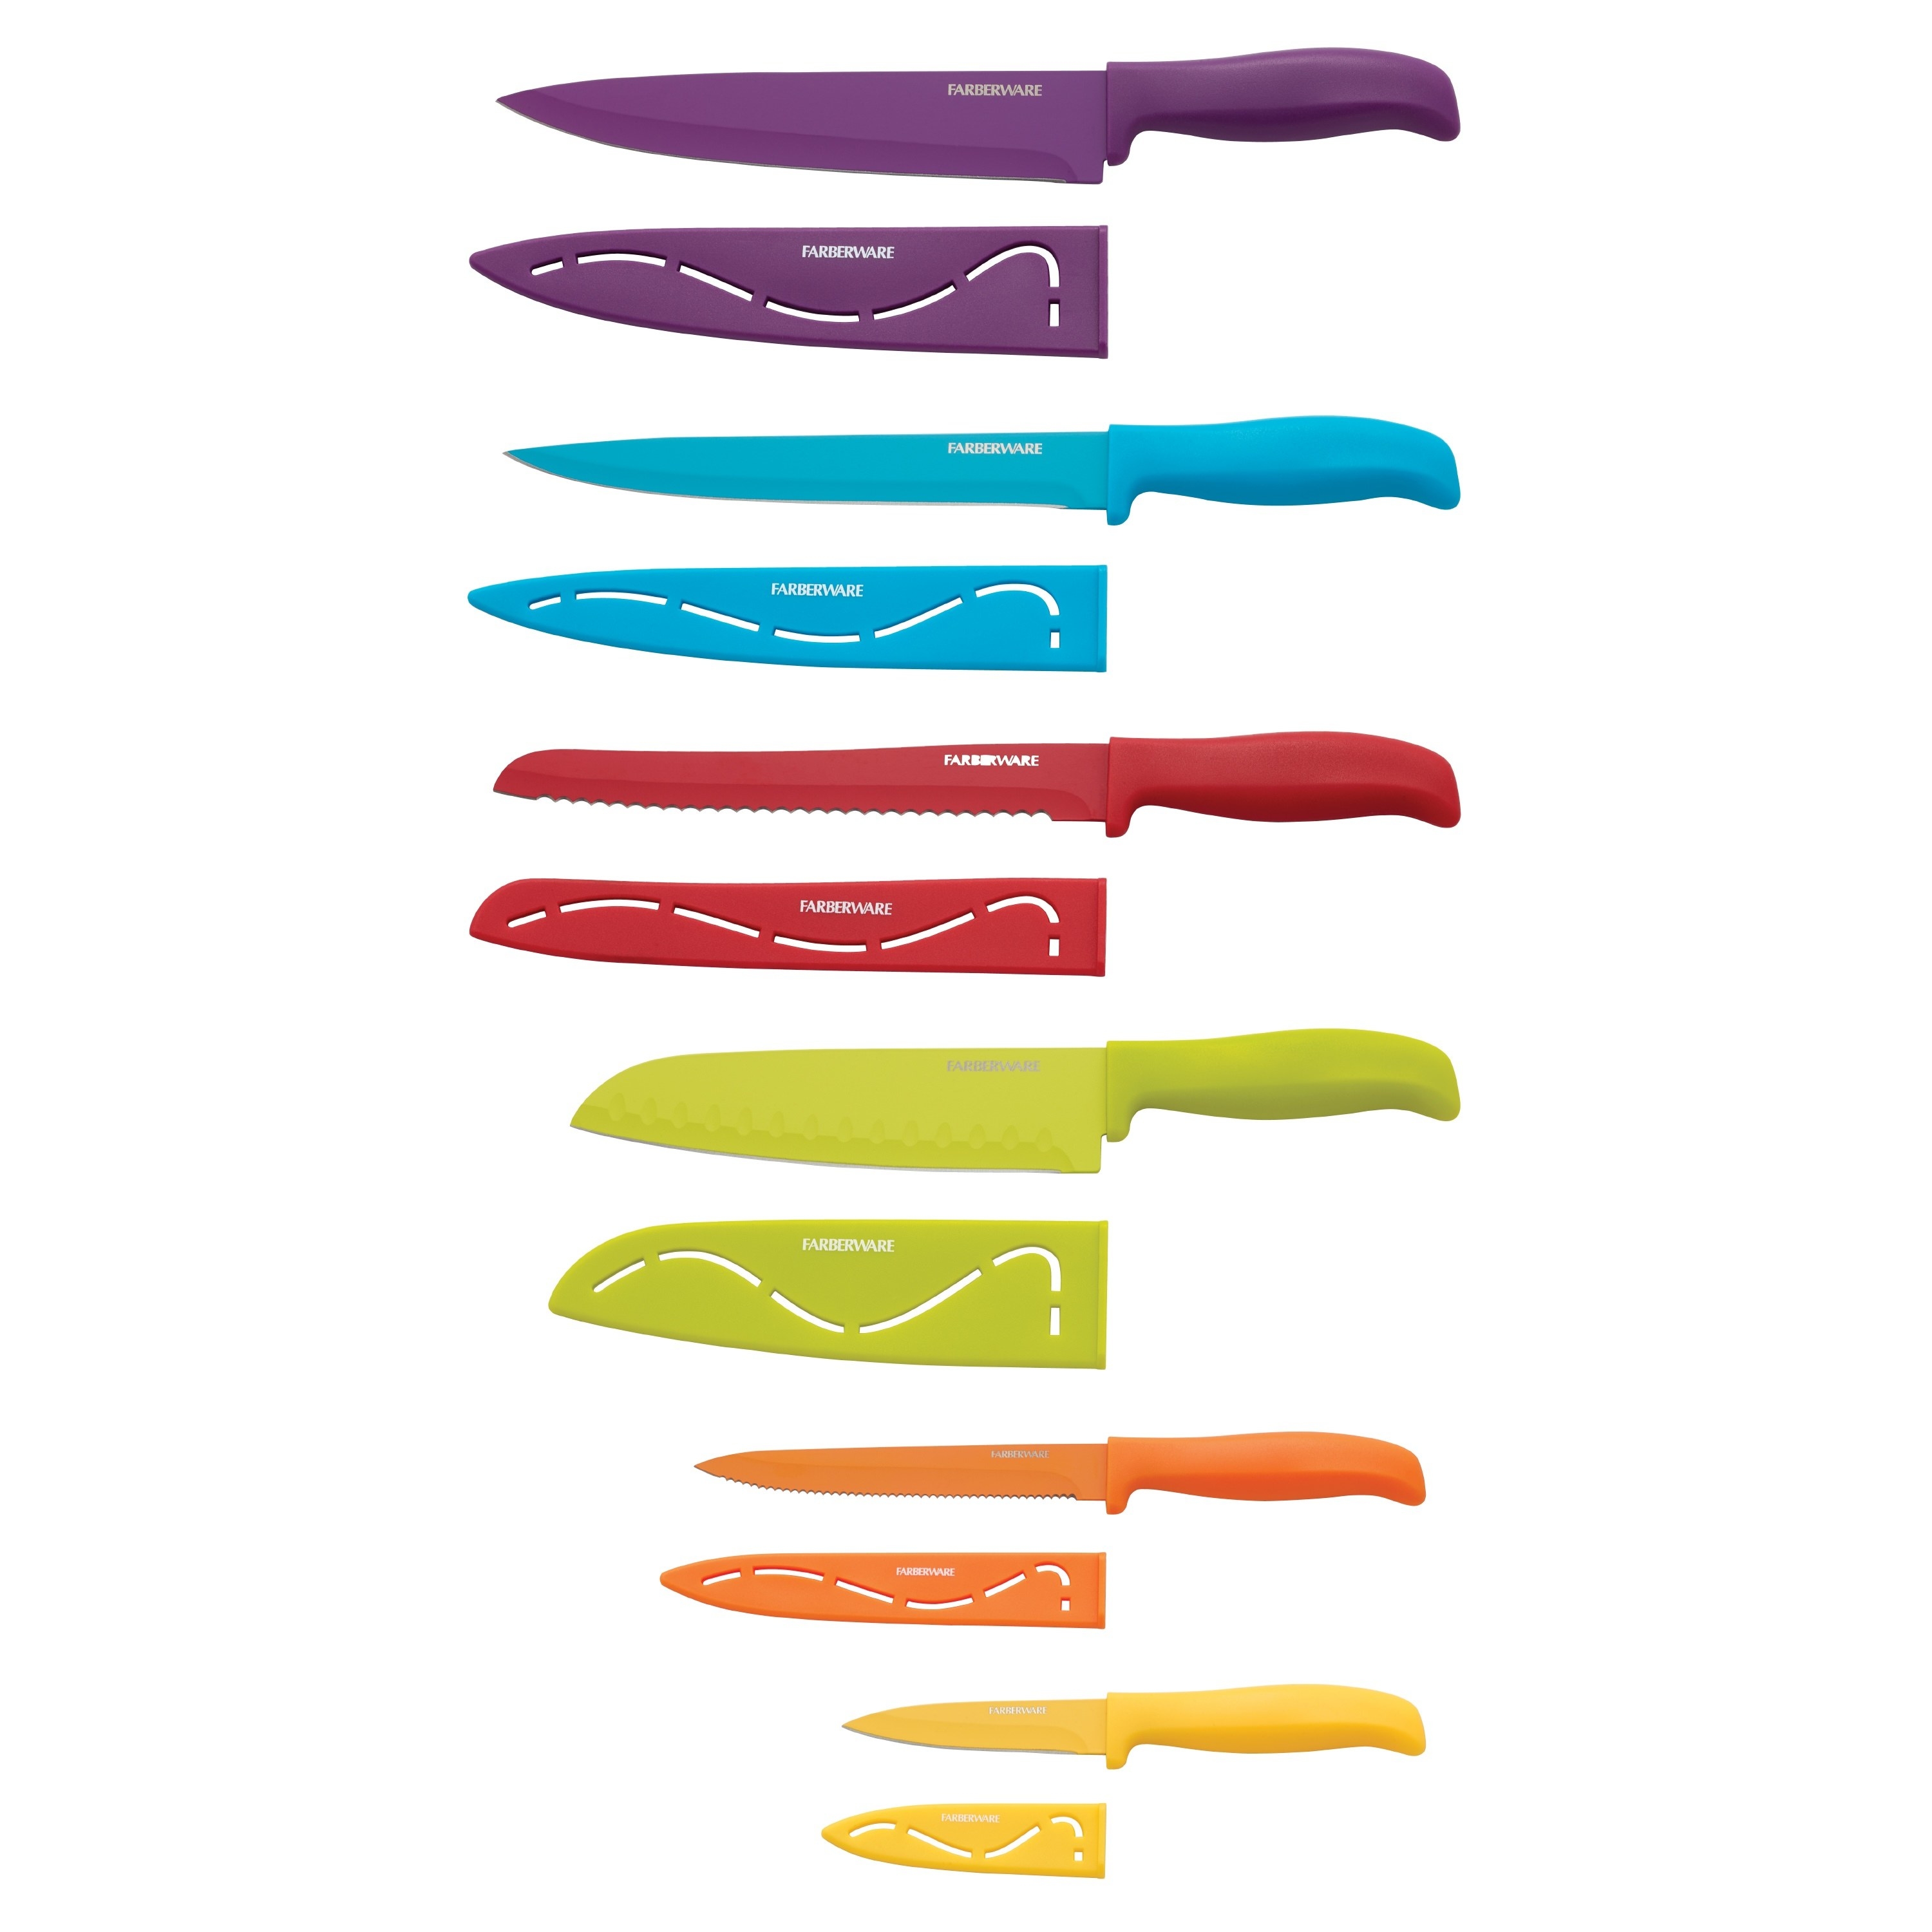 Rainbow colored knives and covers